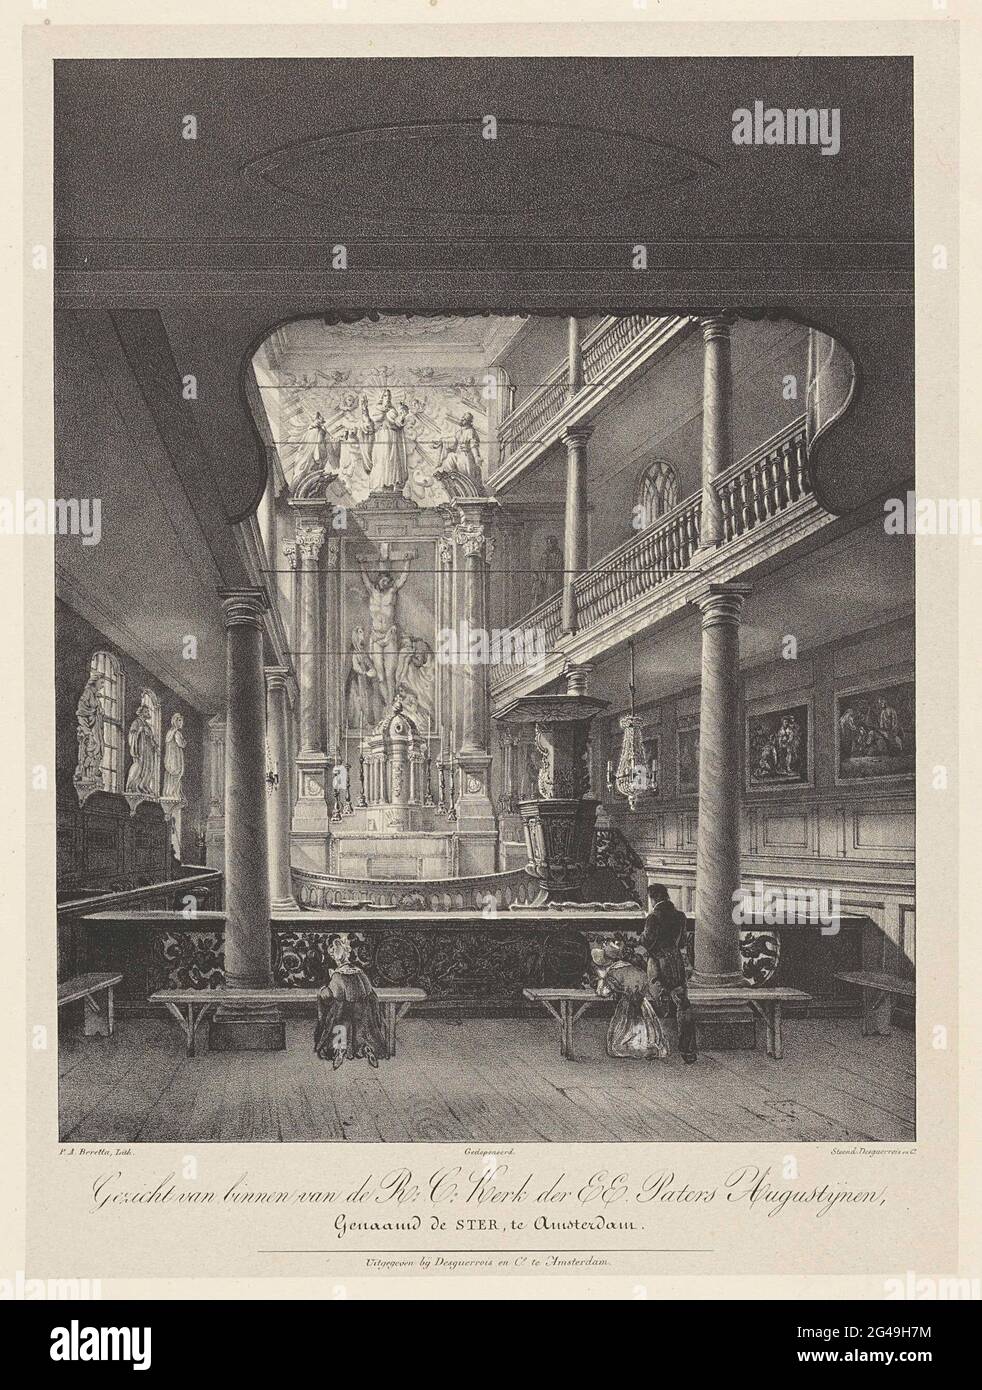 Augustijnenkerk "De Ster" in In the interior of the church, three figures are kneeling their face to the altar. The two women and the man are seen on the back.